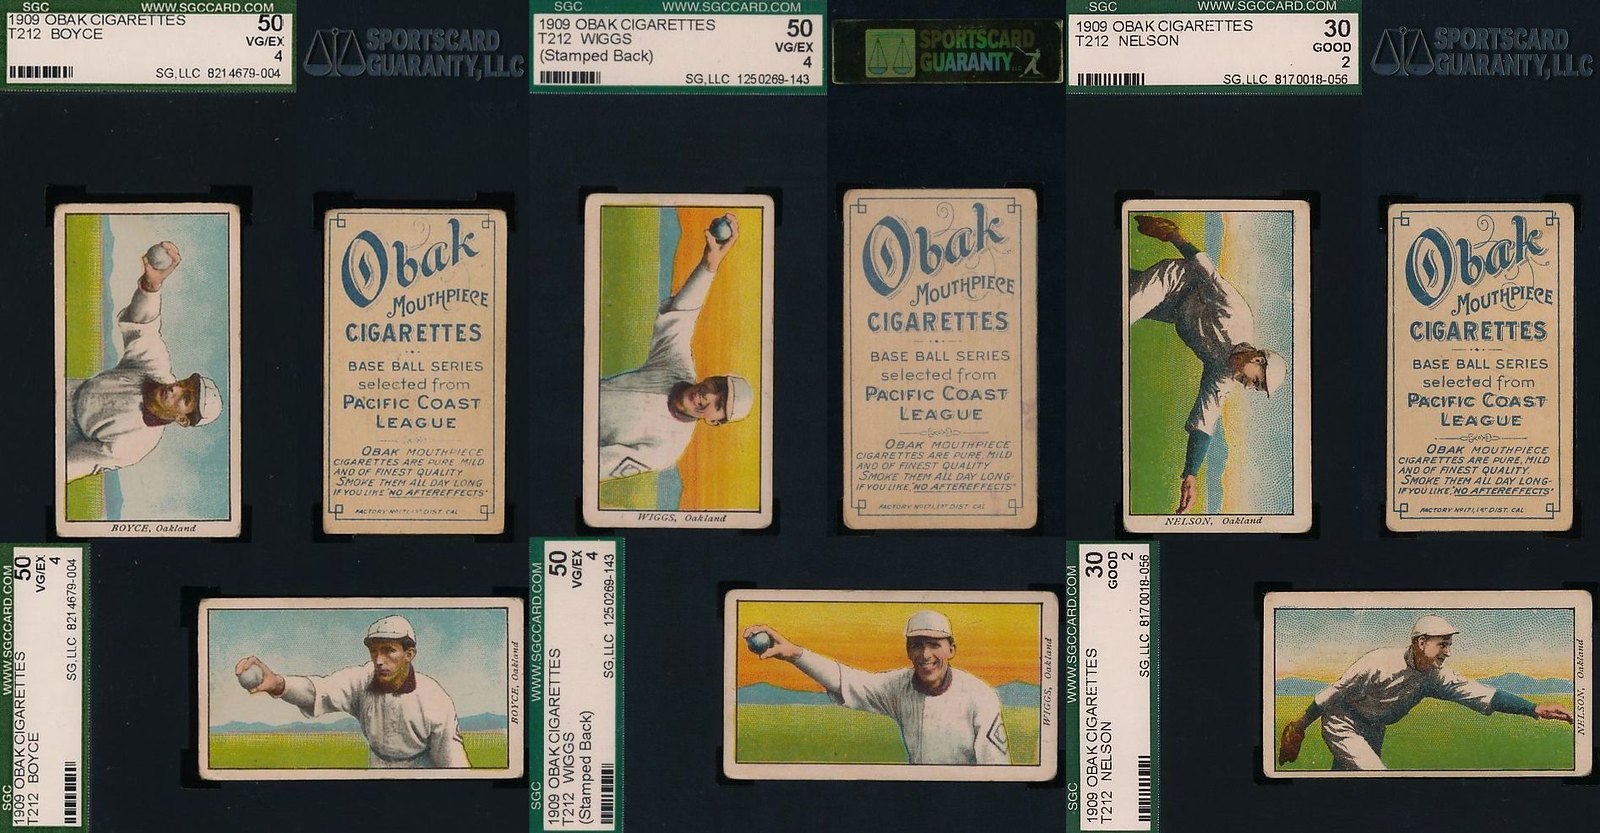 1909 T212-1 Obak Cigarettes Baseball Card (With-frame Back Design) - Horizontals - THIN MAN TRIO - George Boyce / Jimmy Wiggs / Harry "Slim" Nelson - Tall and Thin Trio of Oakland Oaks' Pitchers